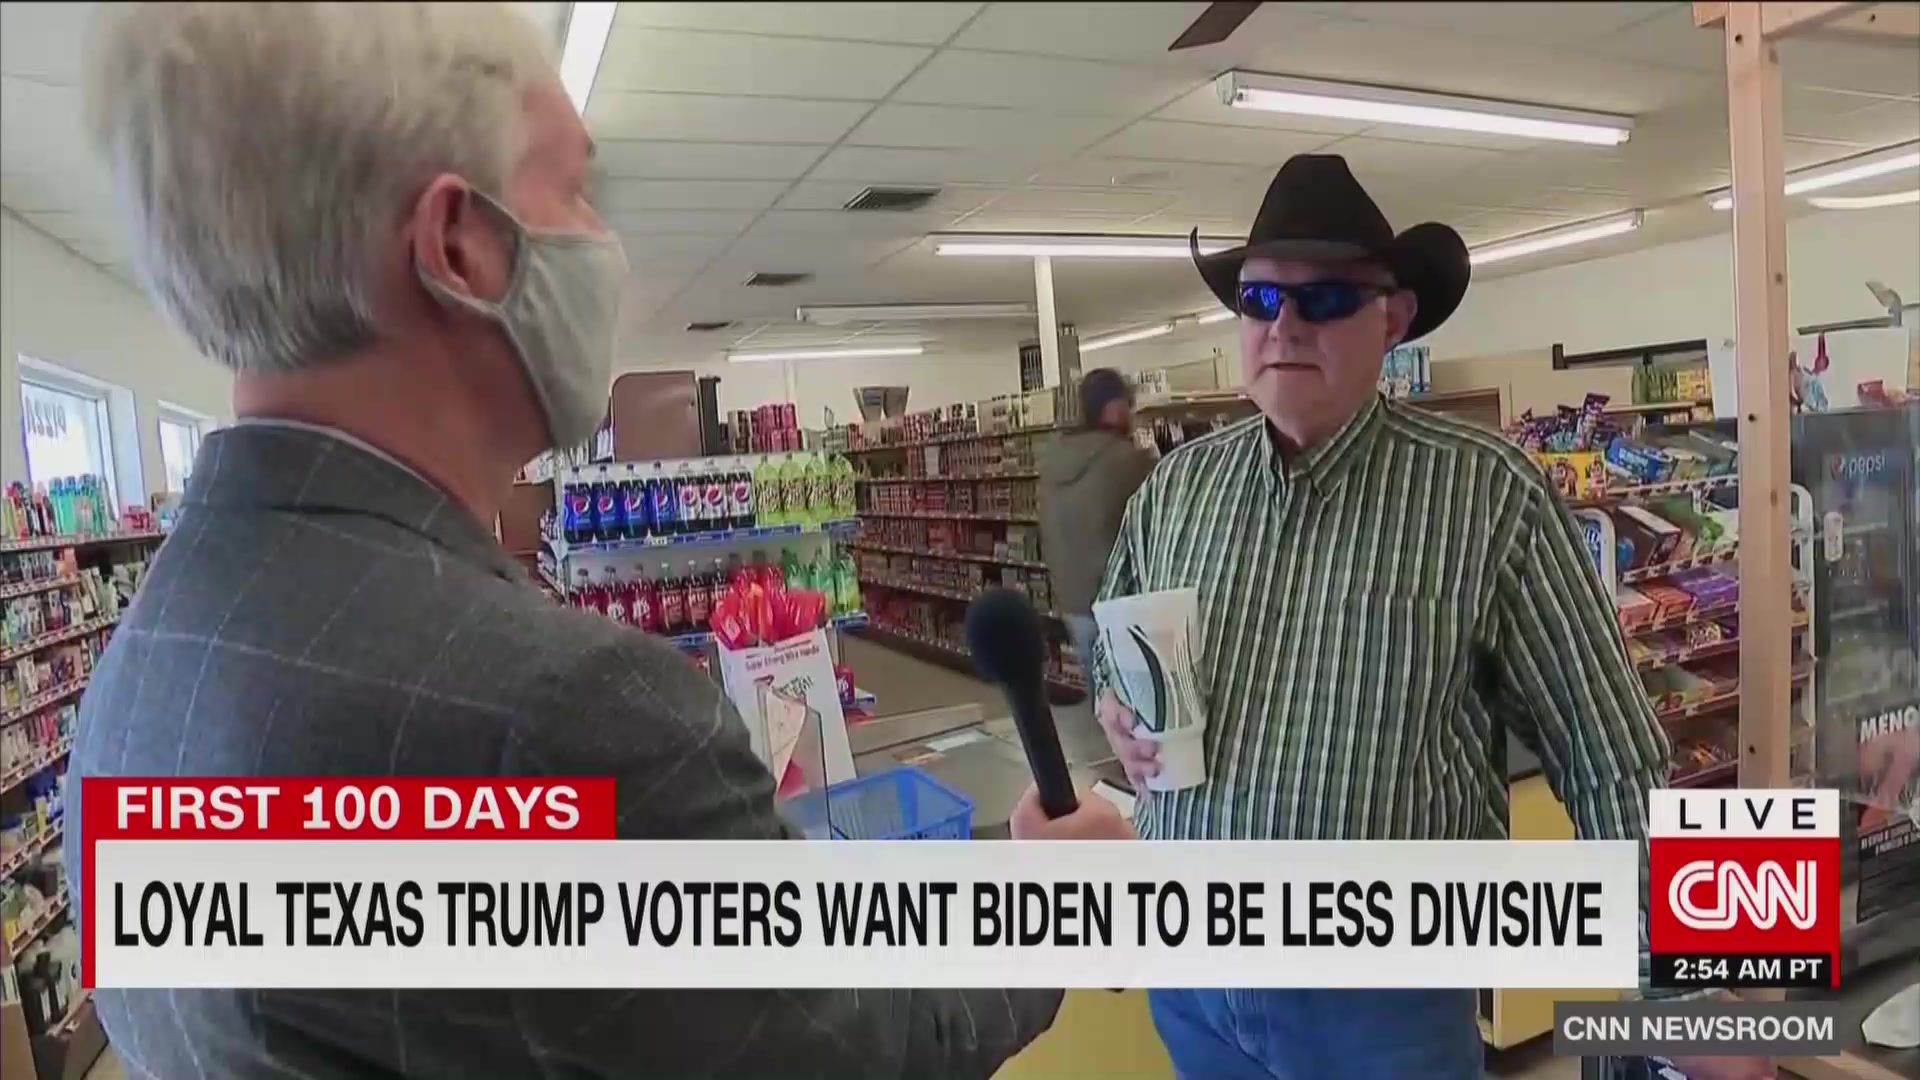 After Biden Pledges Unity in Inauguration Speech, Texas Trump Voters Say He Should Be ‘Less Divisive’